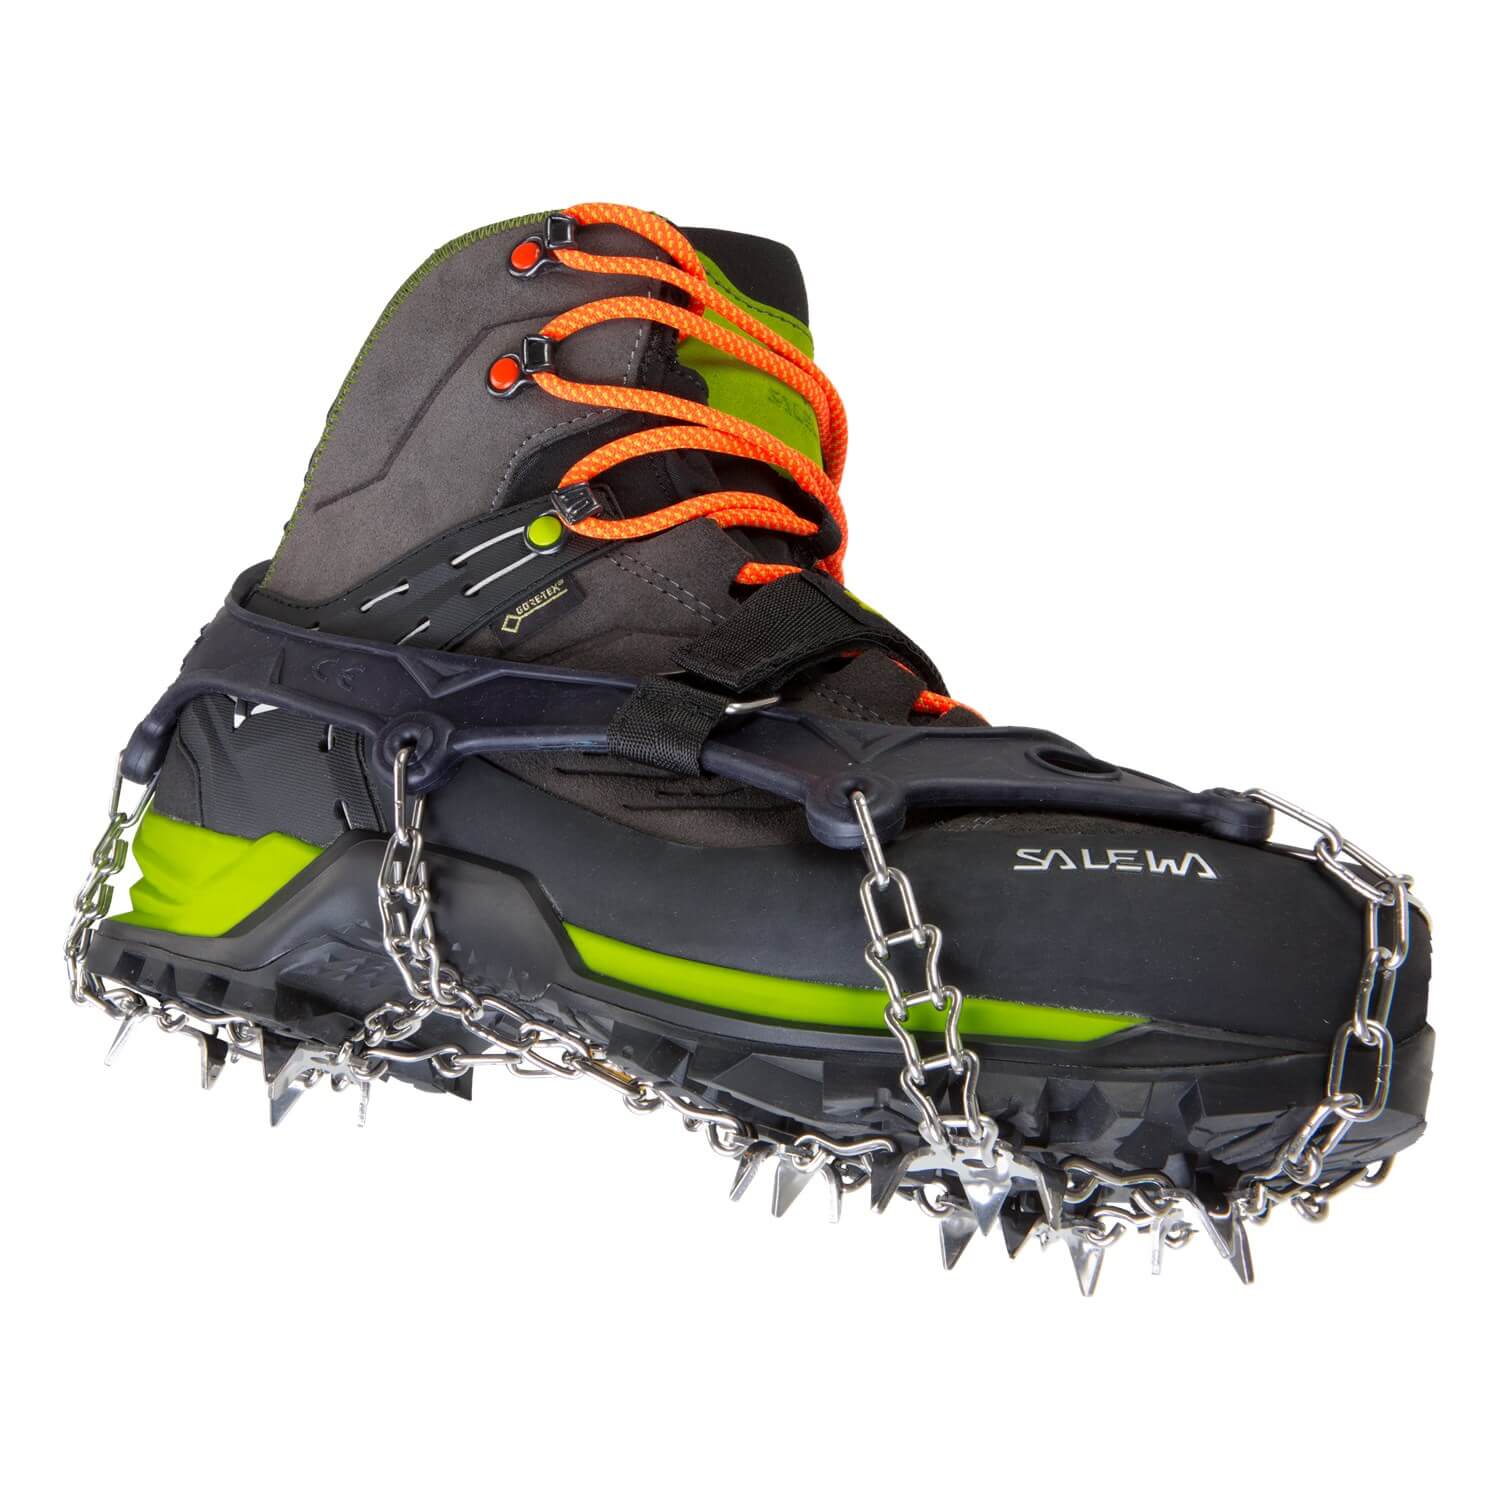 Crampon Guide NZ – Further Faster